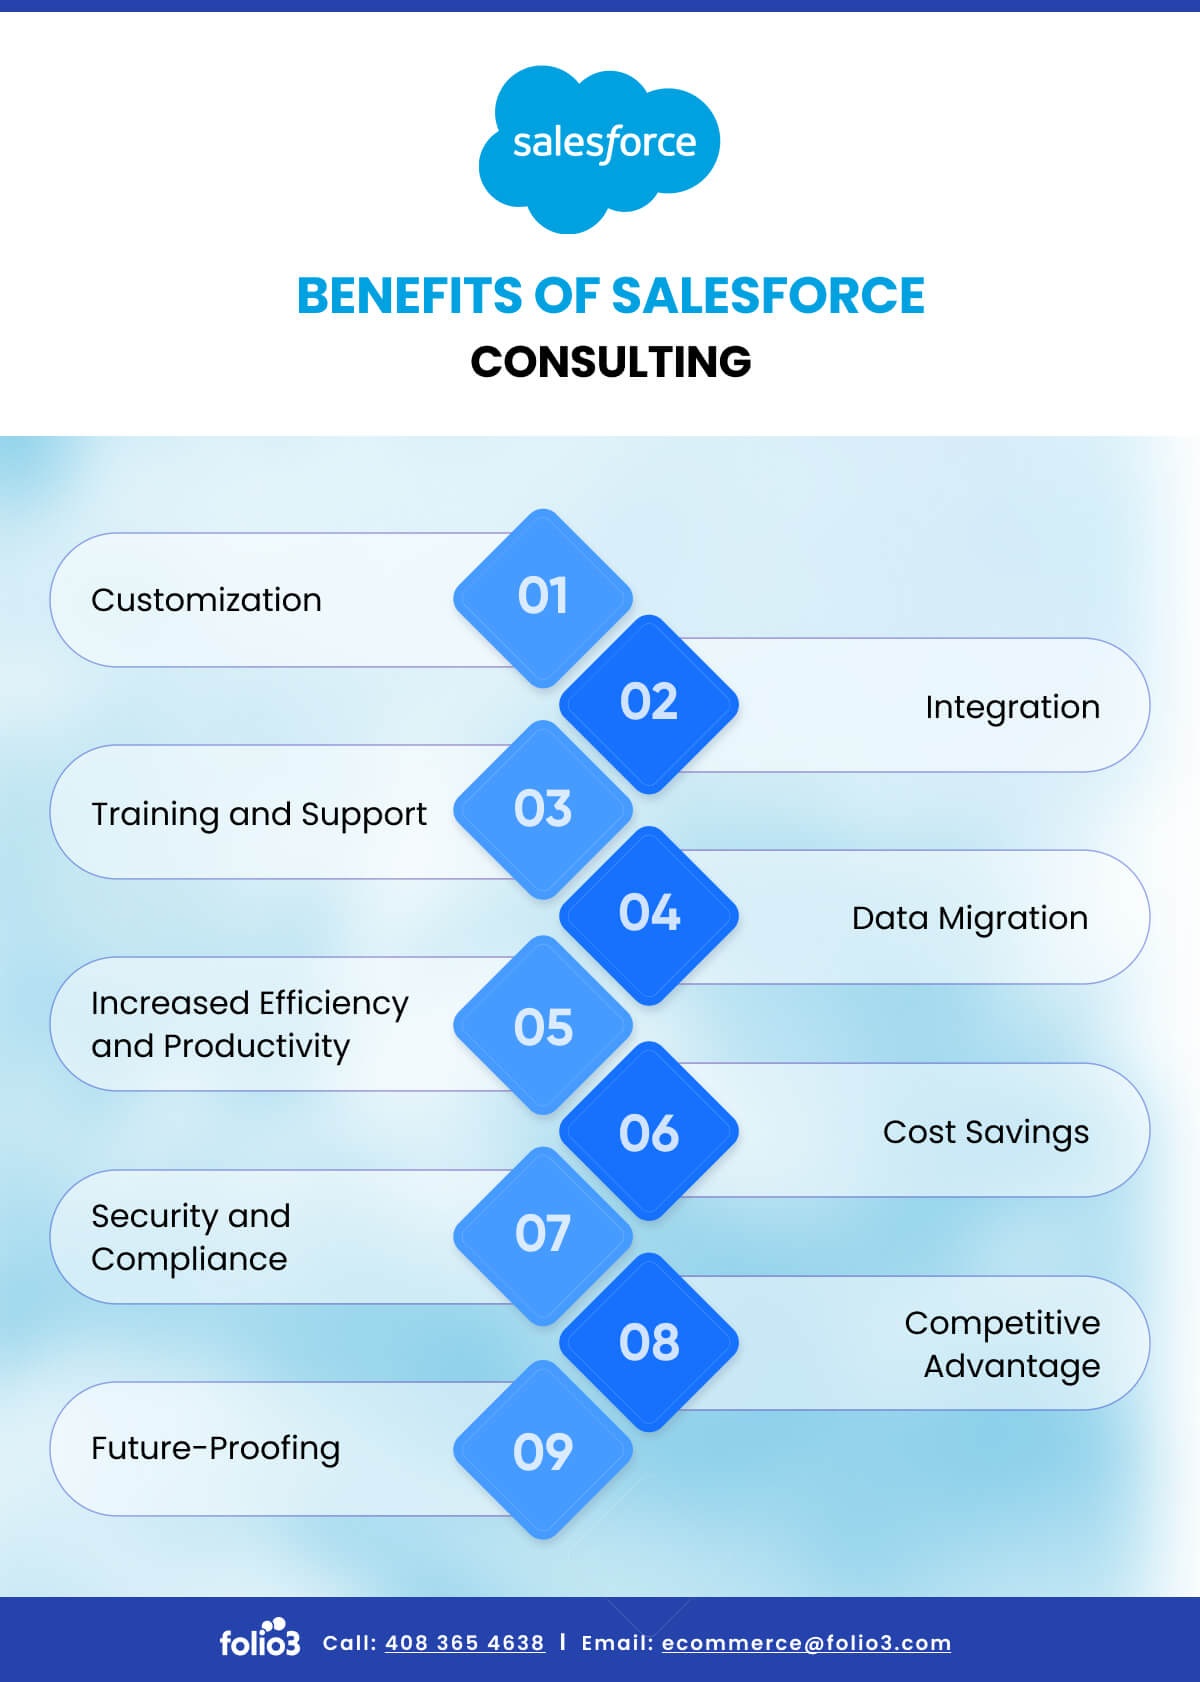 Benefits of Salesforce Consulting